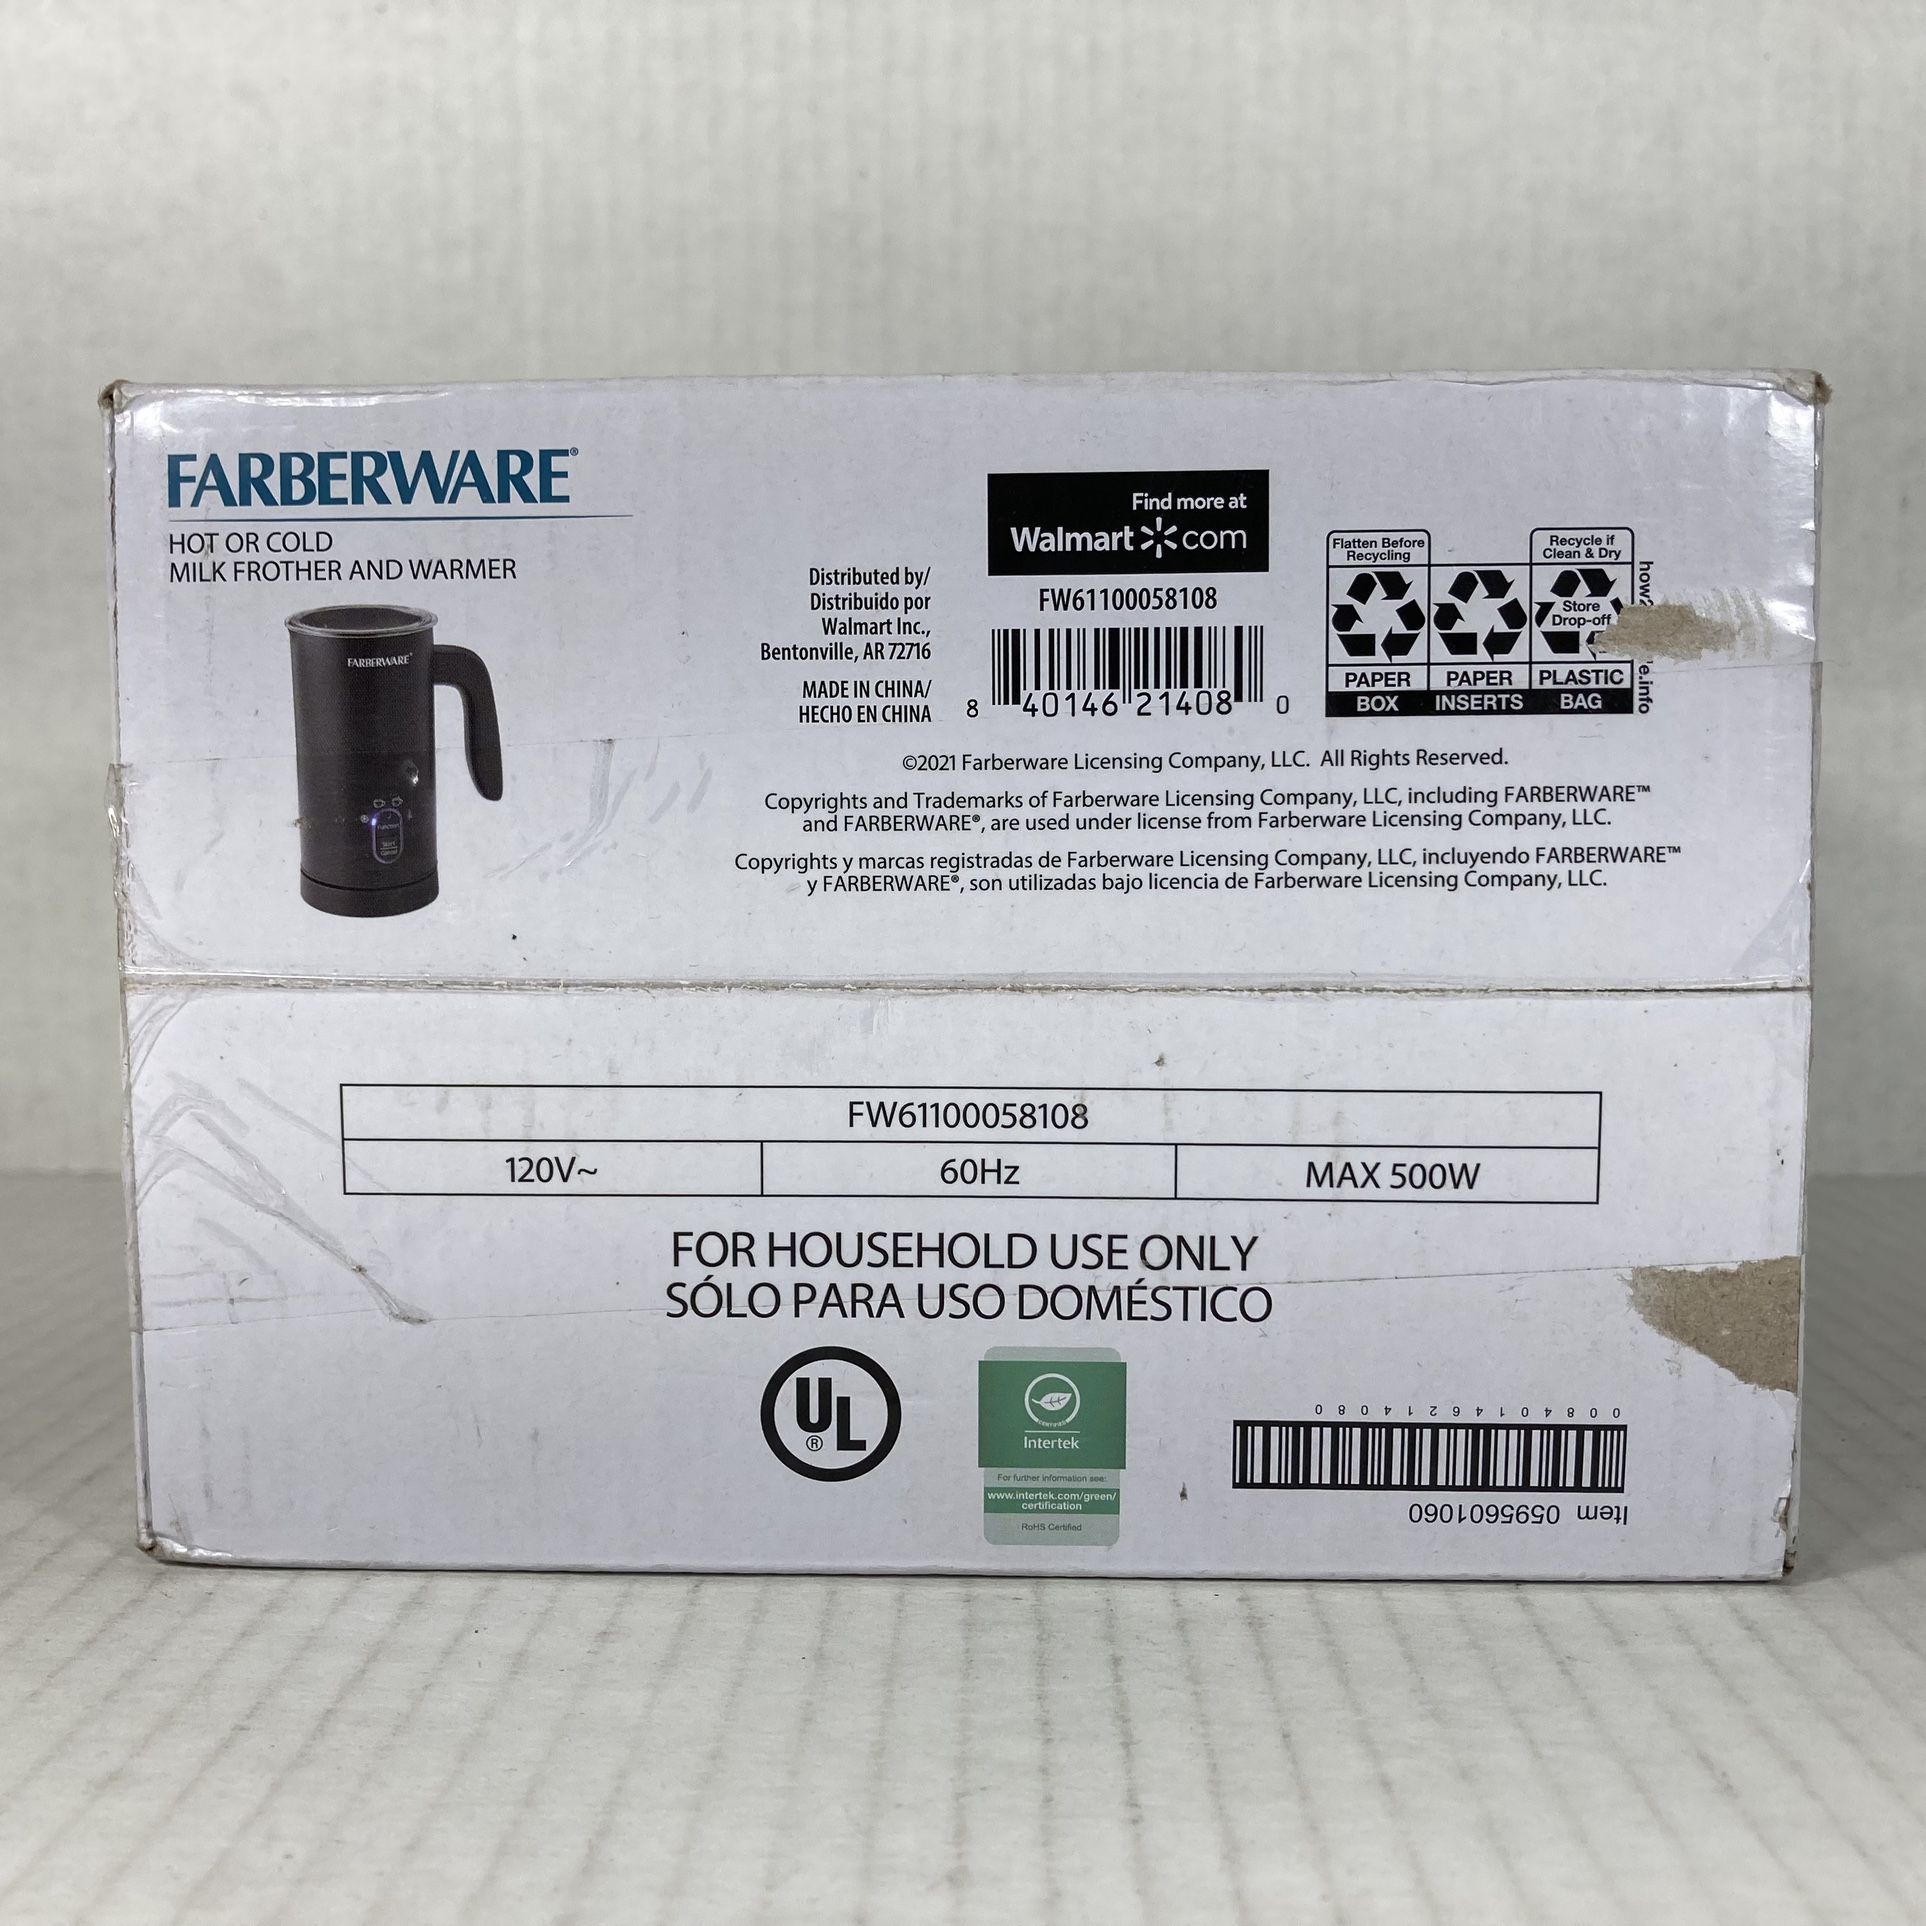 Farberware 4 Functions Hot or Cold Milk Frother & Warmer USED - HANDLE  BROKEN for Sale in Tempe, AZ - OfferUp